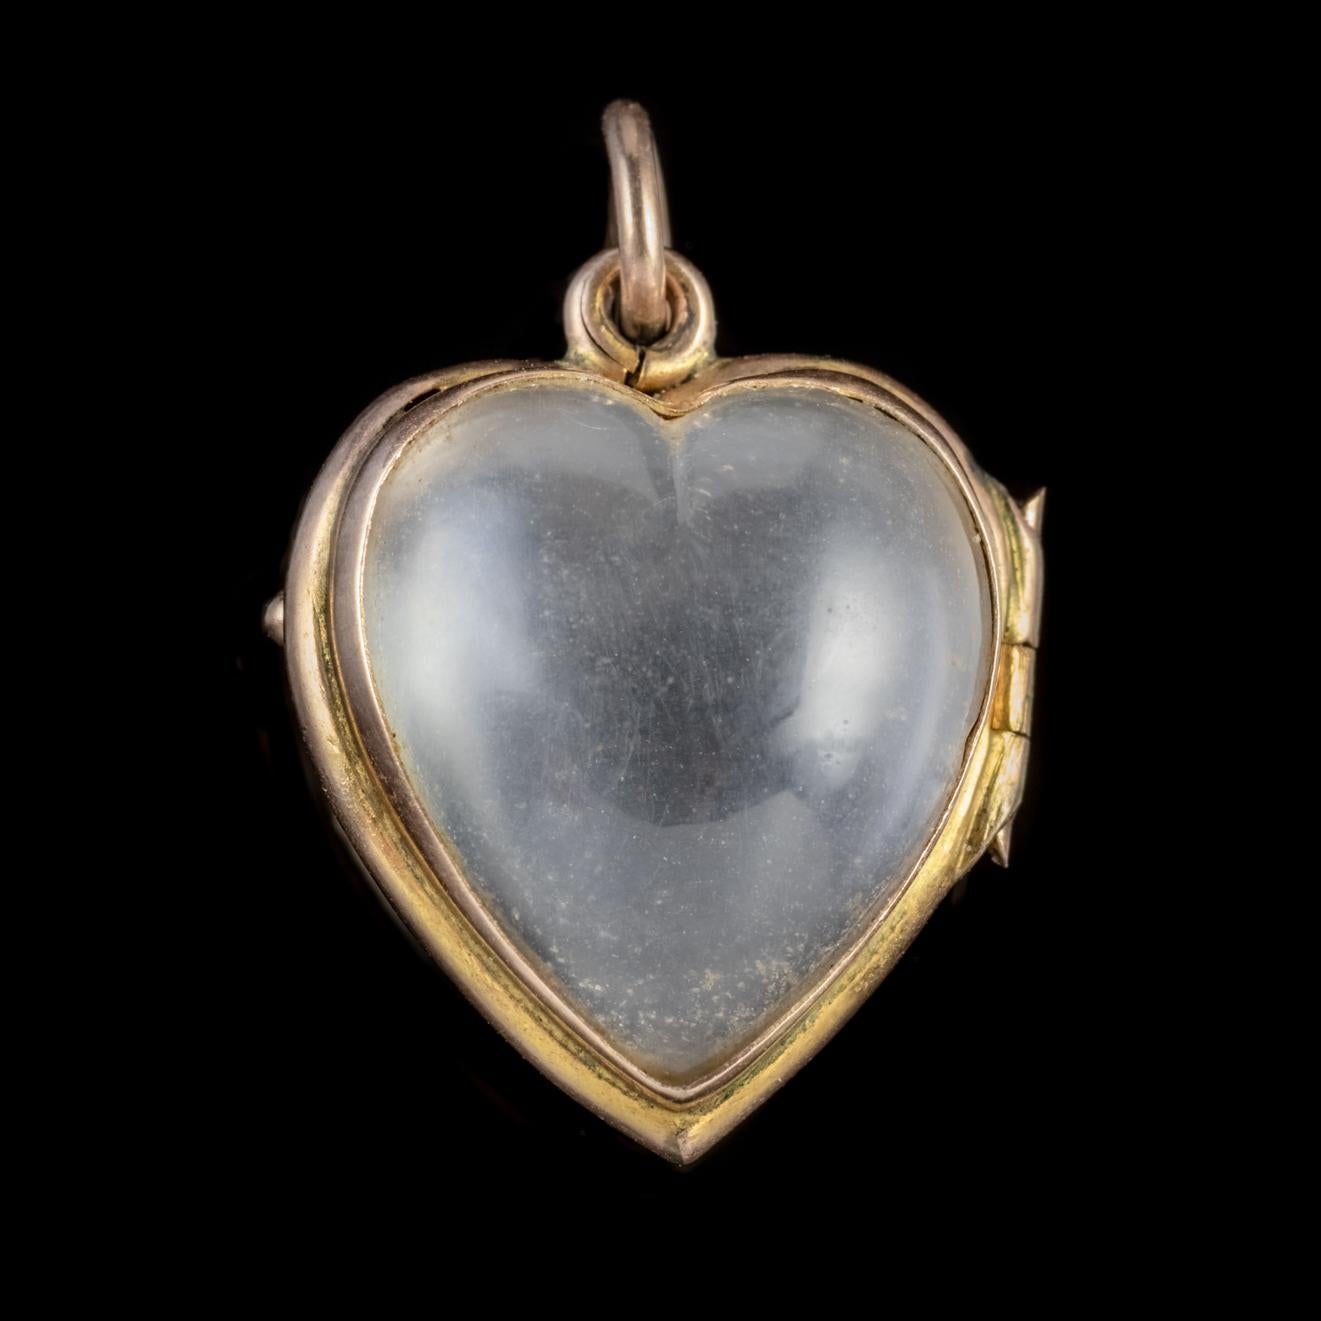 A delightful antique Victorian heart locket set with two lovely smooth Pools of light Rock Crystal hearts which open up allowing a photograph or lock of hair to be secured within and viewed through the transparent stones which magnify it. 

Pools of